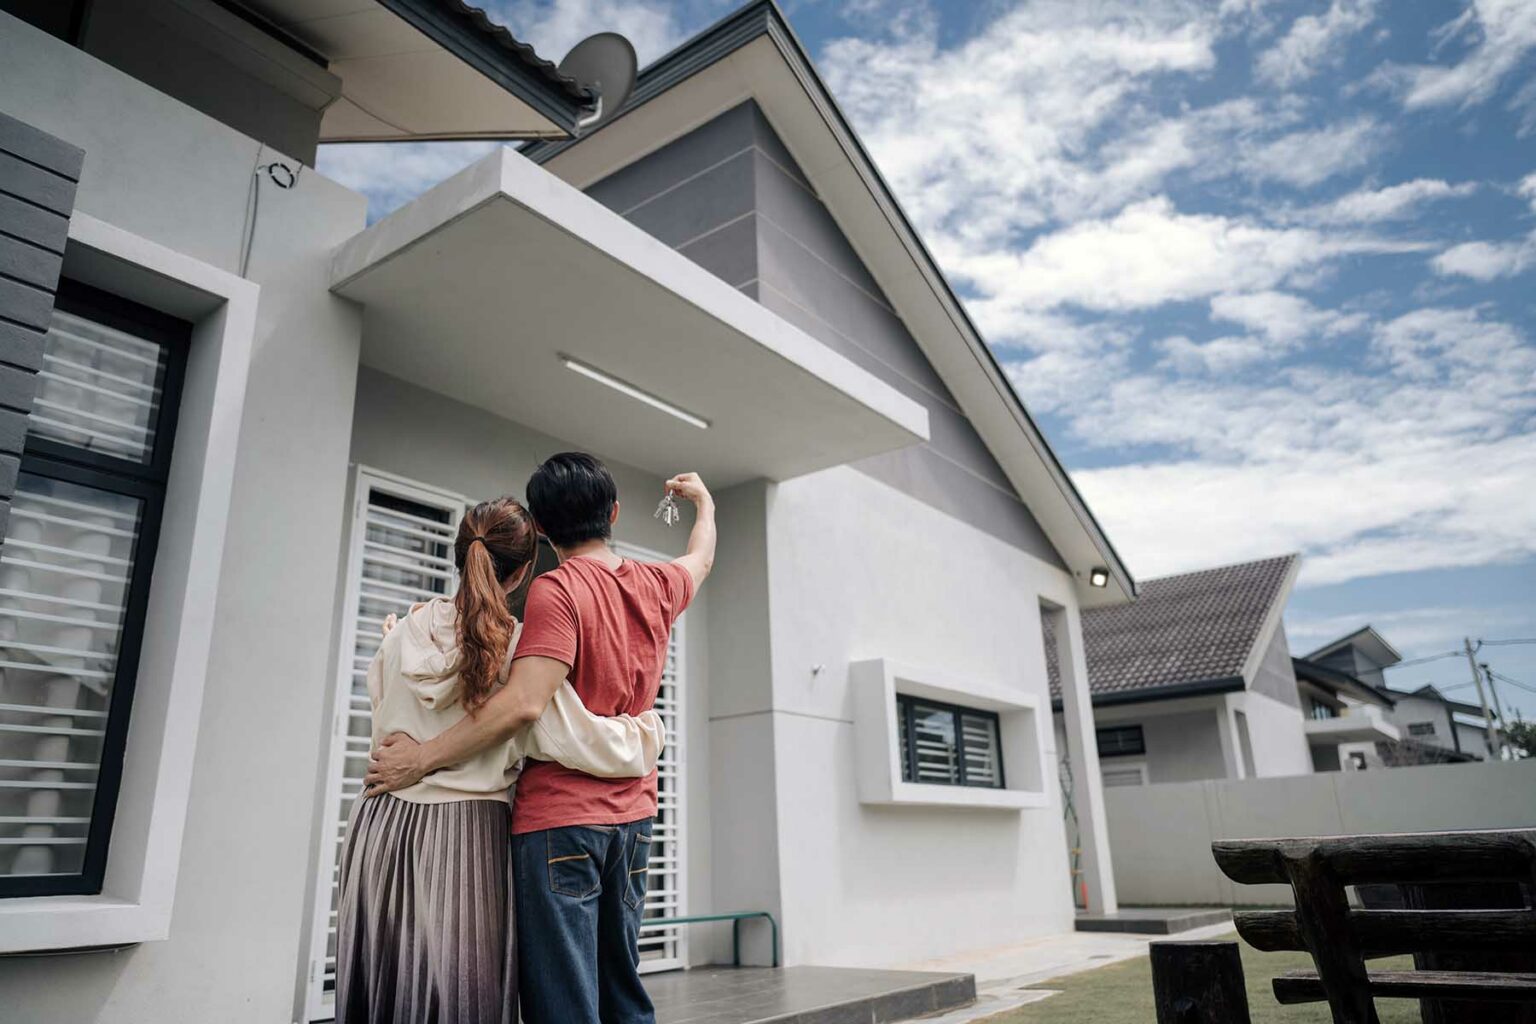 Couple embracing while looking at their new home. The man is holding up the keys in the air.